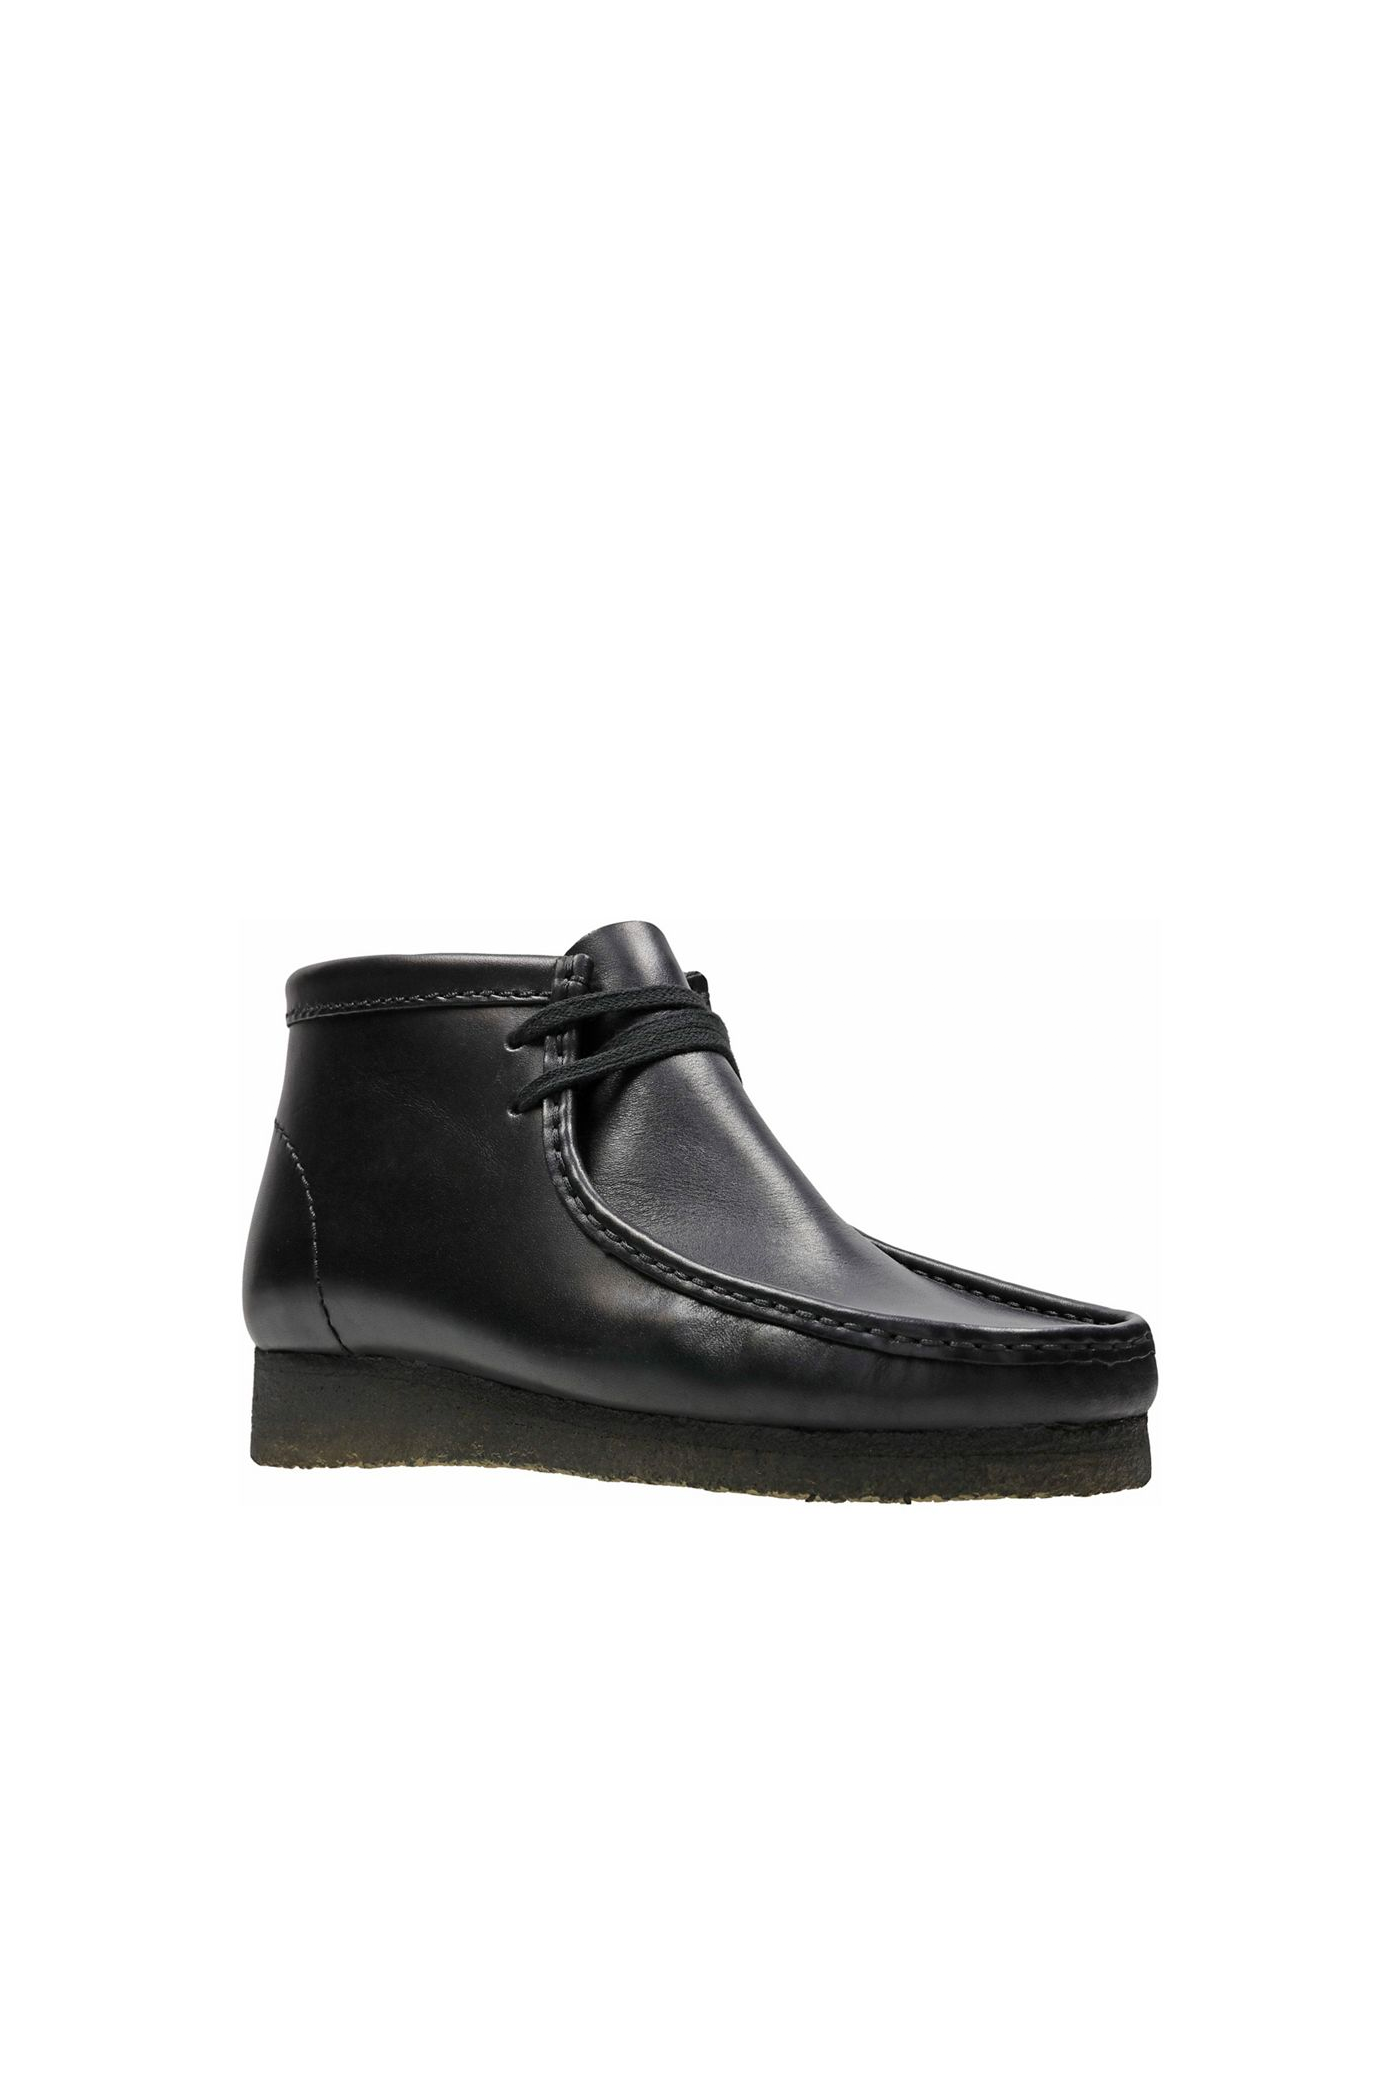 Wallabee Boot in Black Leather